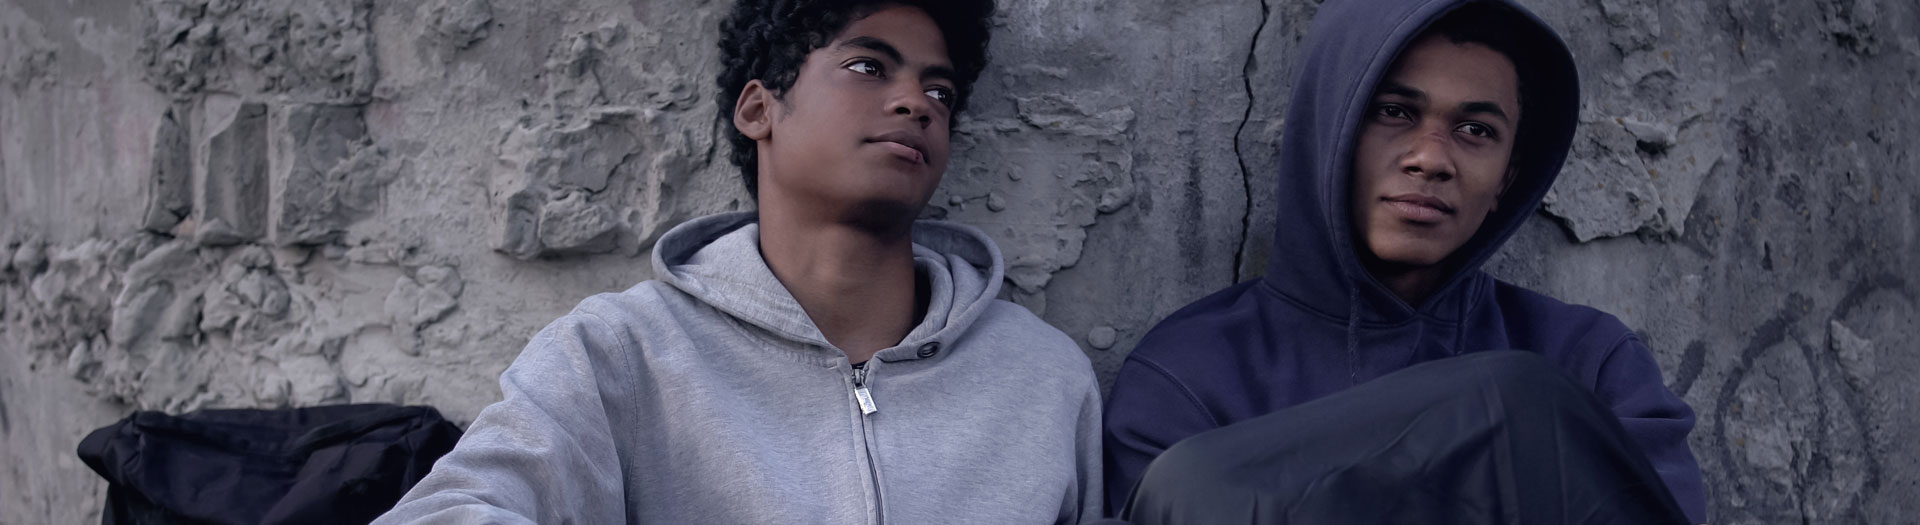 Two young men leaning against a textured concrete wall, one wearing a light gray hoodie and the other in a dark blue hoodie. Both are gazing off into the distance with thoughtful expressions.